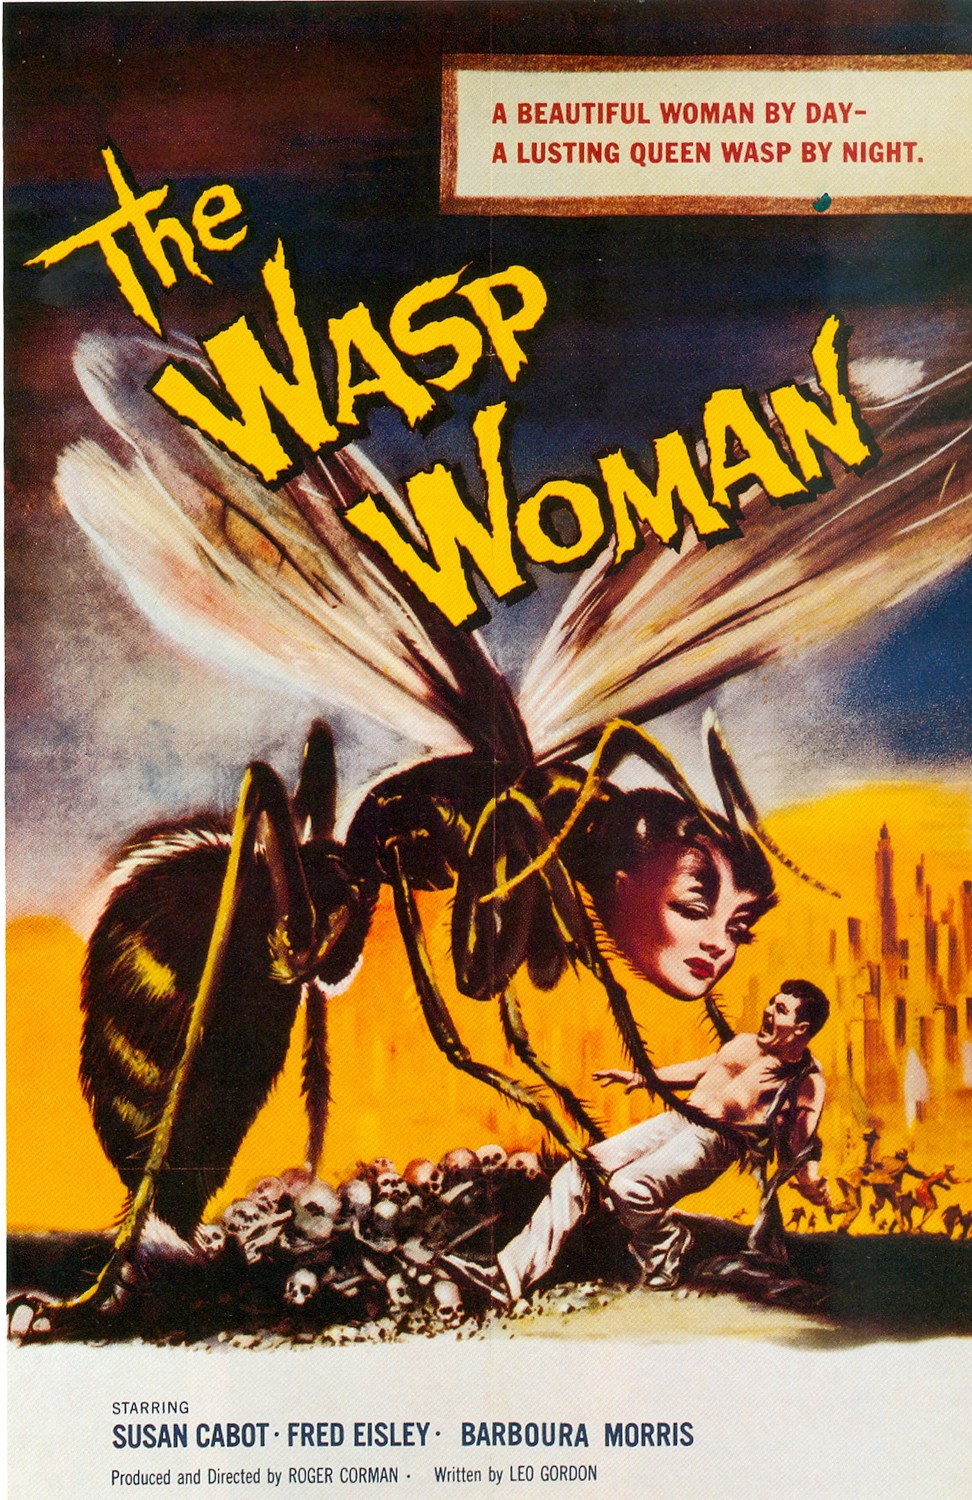 LITTLE MISS RISK’S DUNGEON: THE WASP WOMAN (1959)